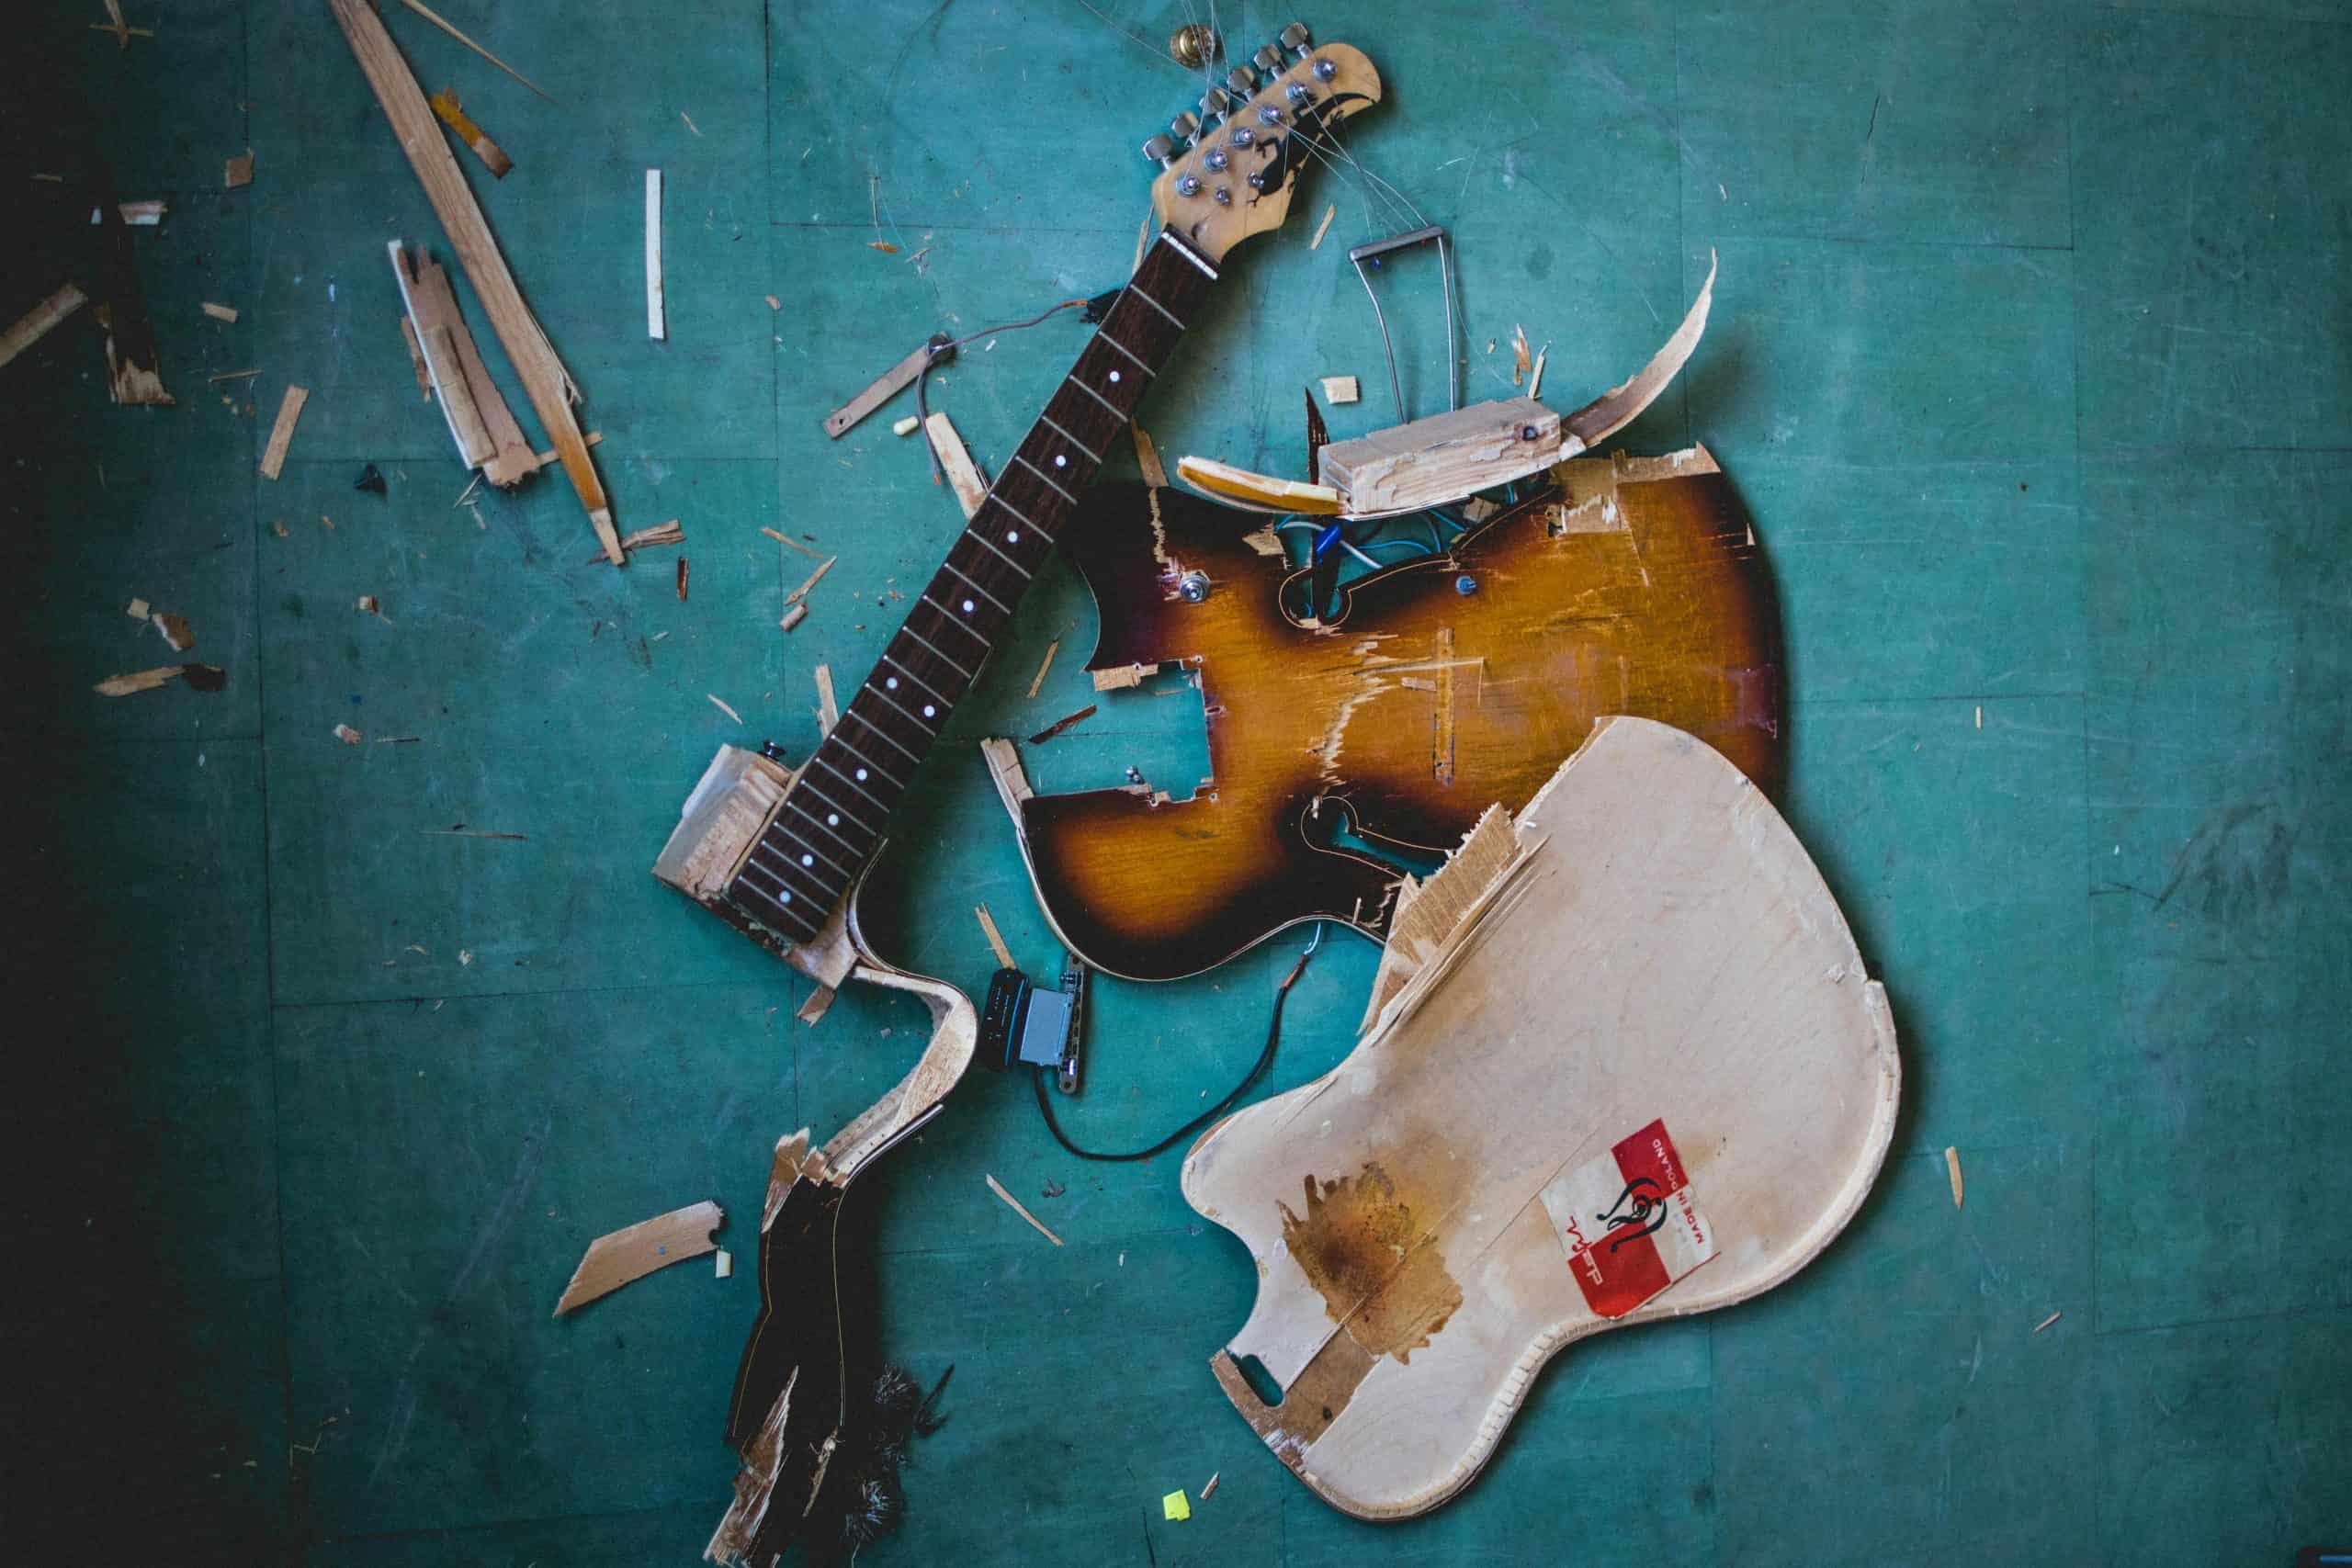 Air Canada takes responsibility for destroying Juno-nominated band's guitar